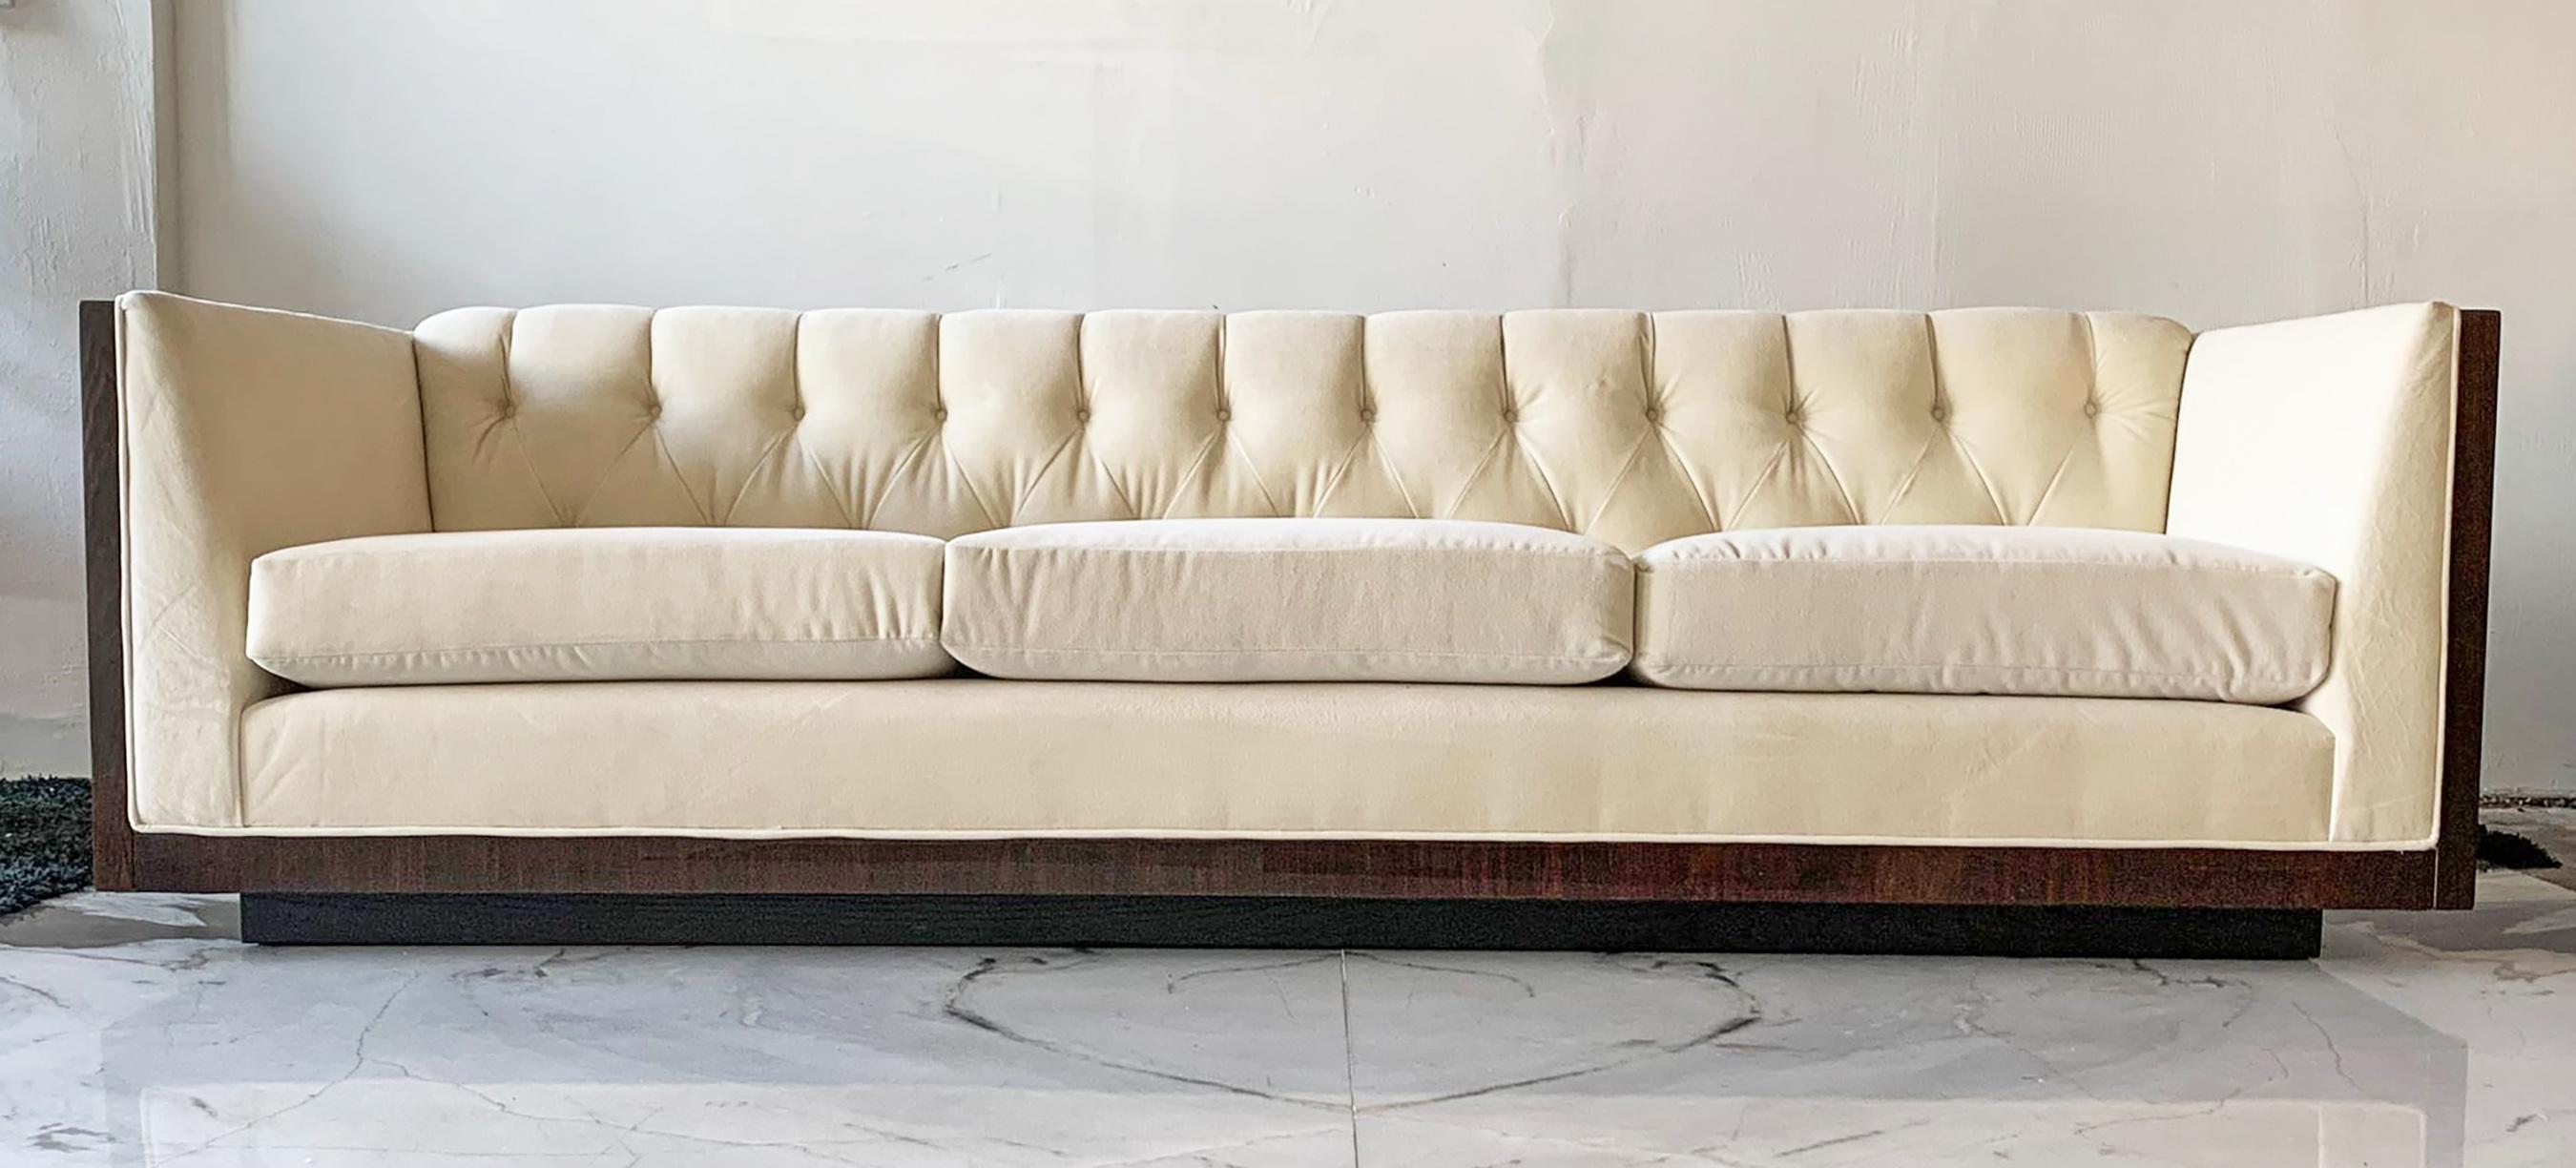 Available right now I have this stunning Milo Baughman style rosewood case sofa. This sofa is completely wrapped in the most gorgeous rosewood and sits on an ebonized plinth base. The sofa has been masterfully reupholstered in a creamy ivory velvet